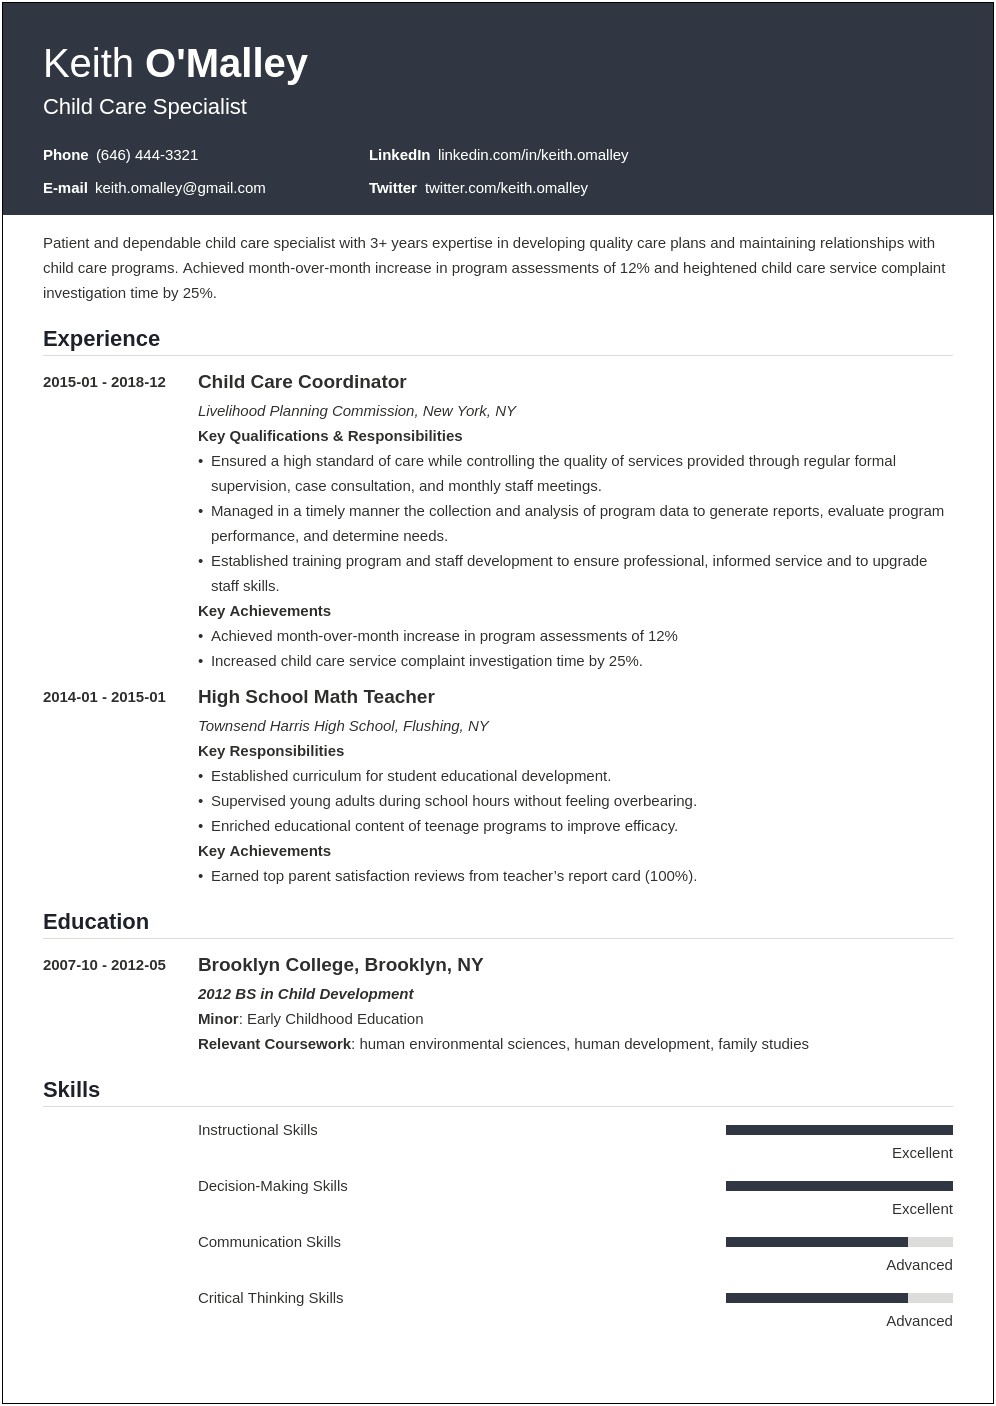 Sample Resume Objective To Work In Childcare